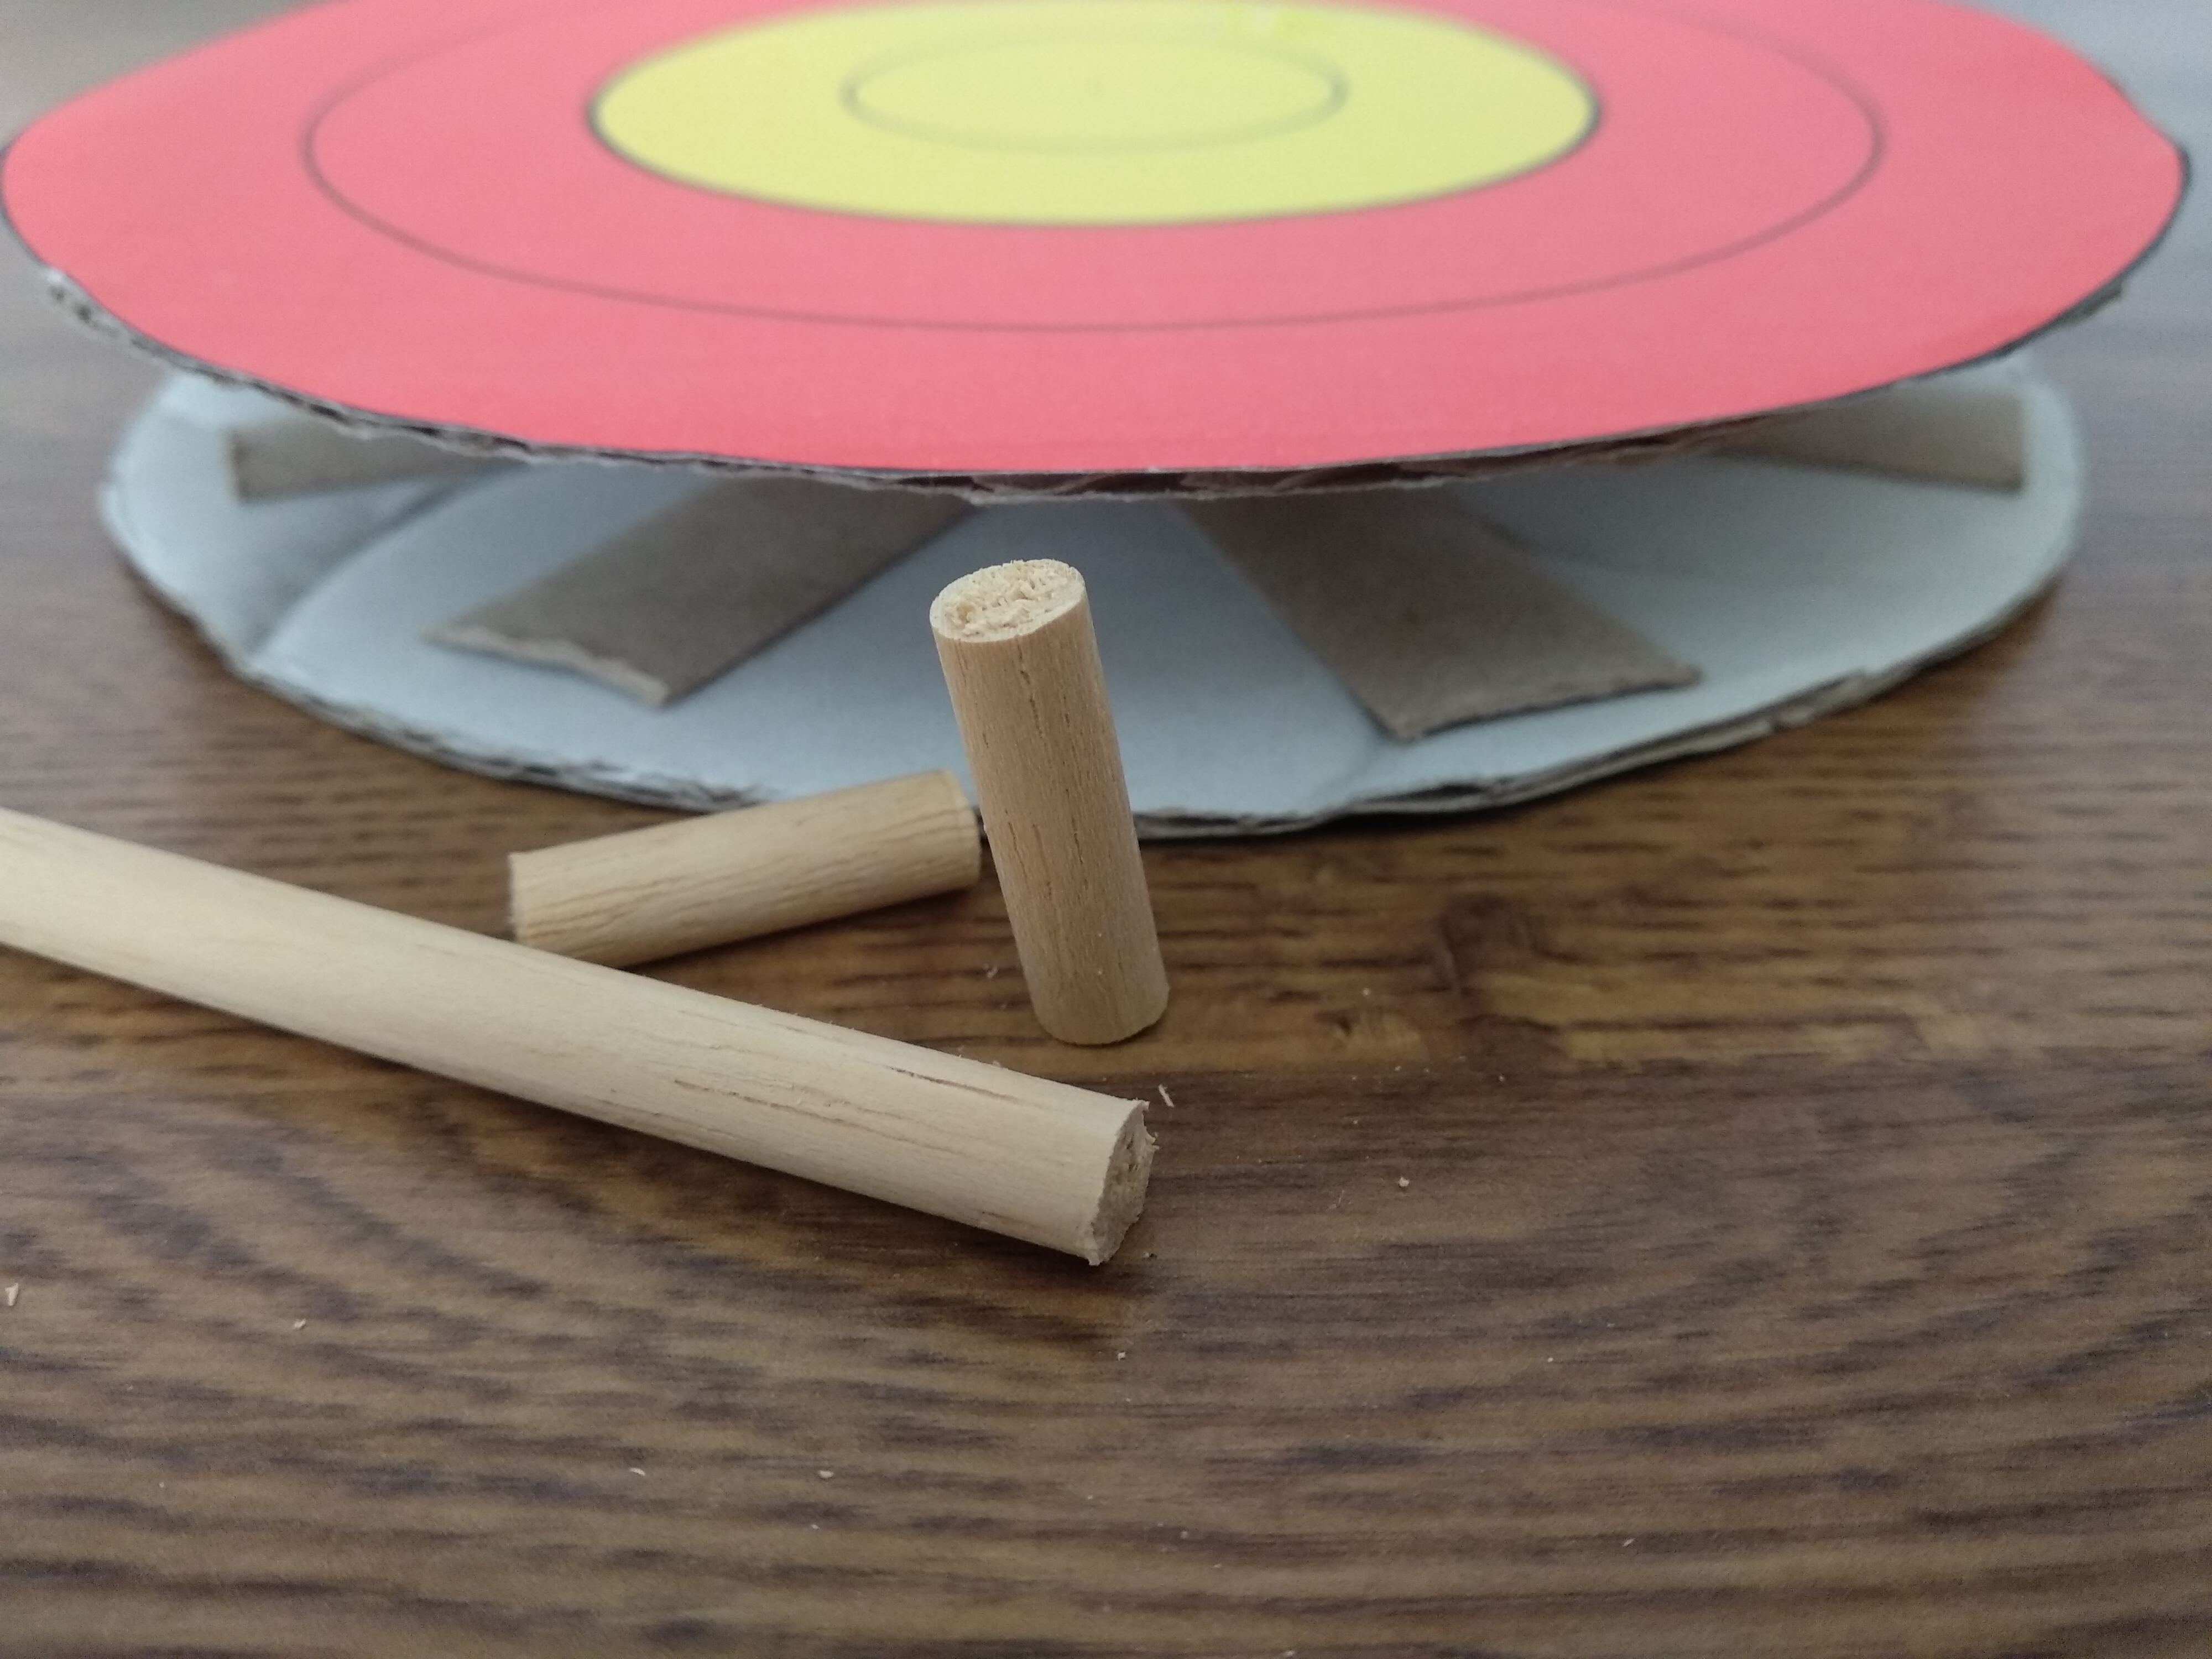 Bouncing Toilet Paper Roll Insert Archery Target | Old Bald Man